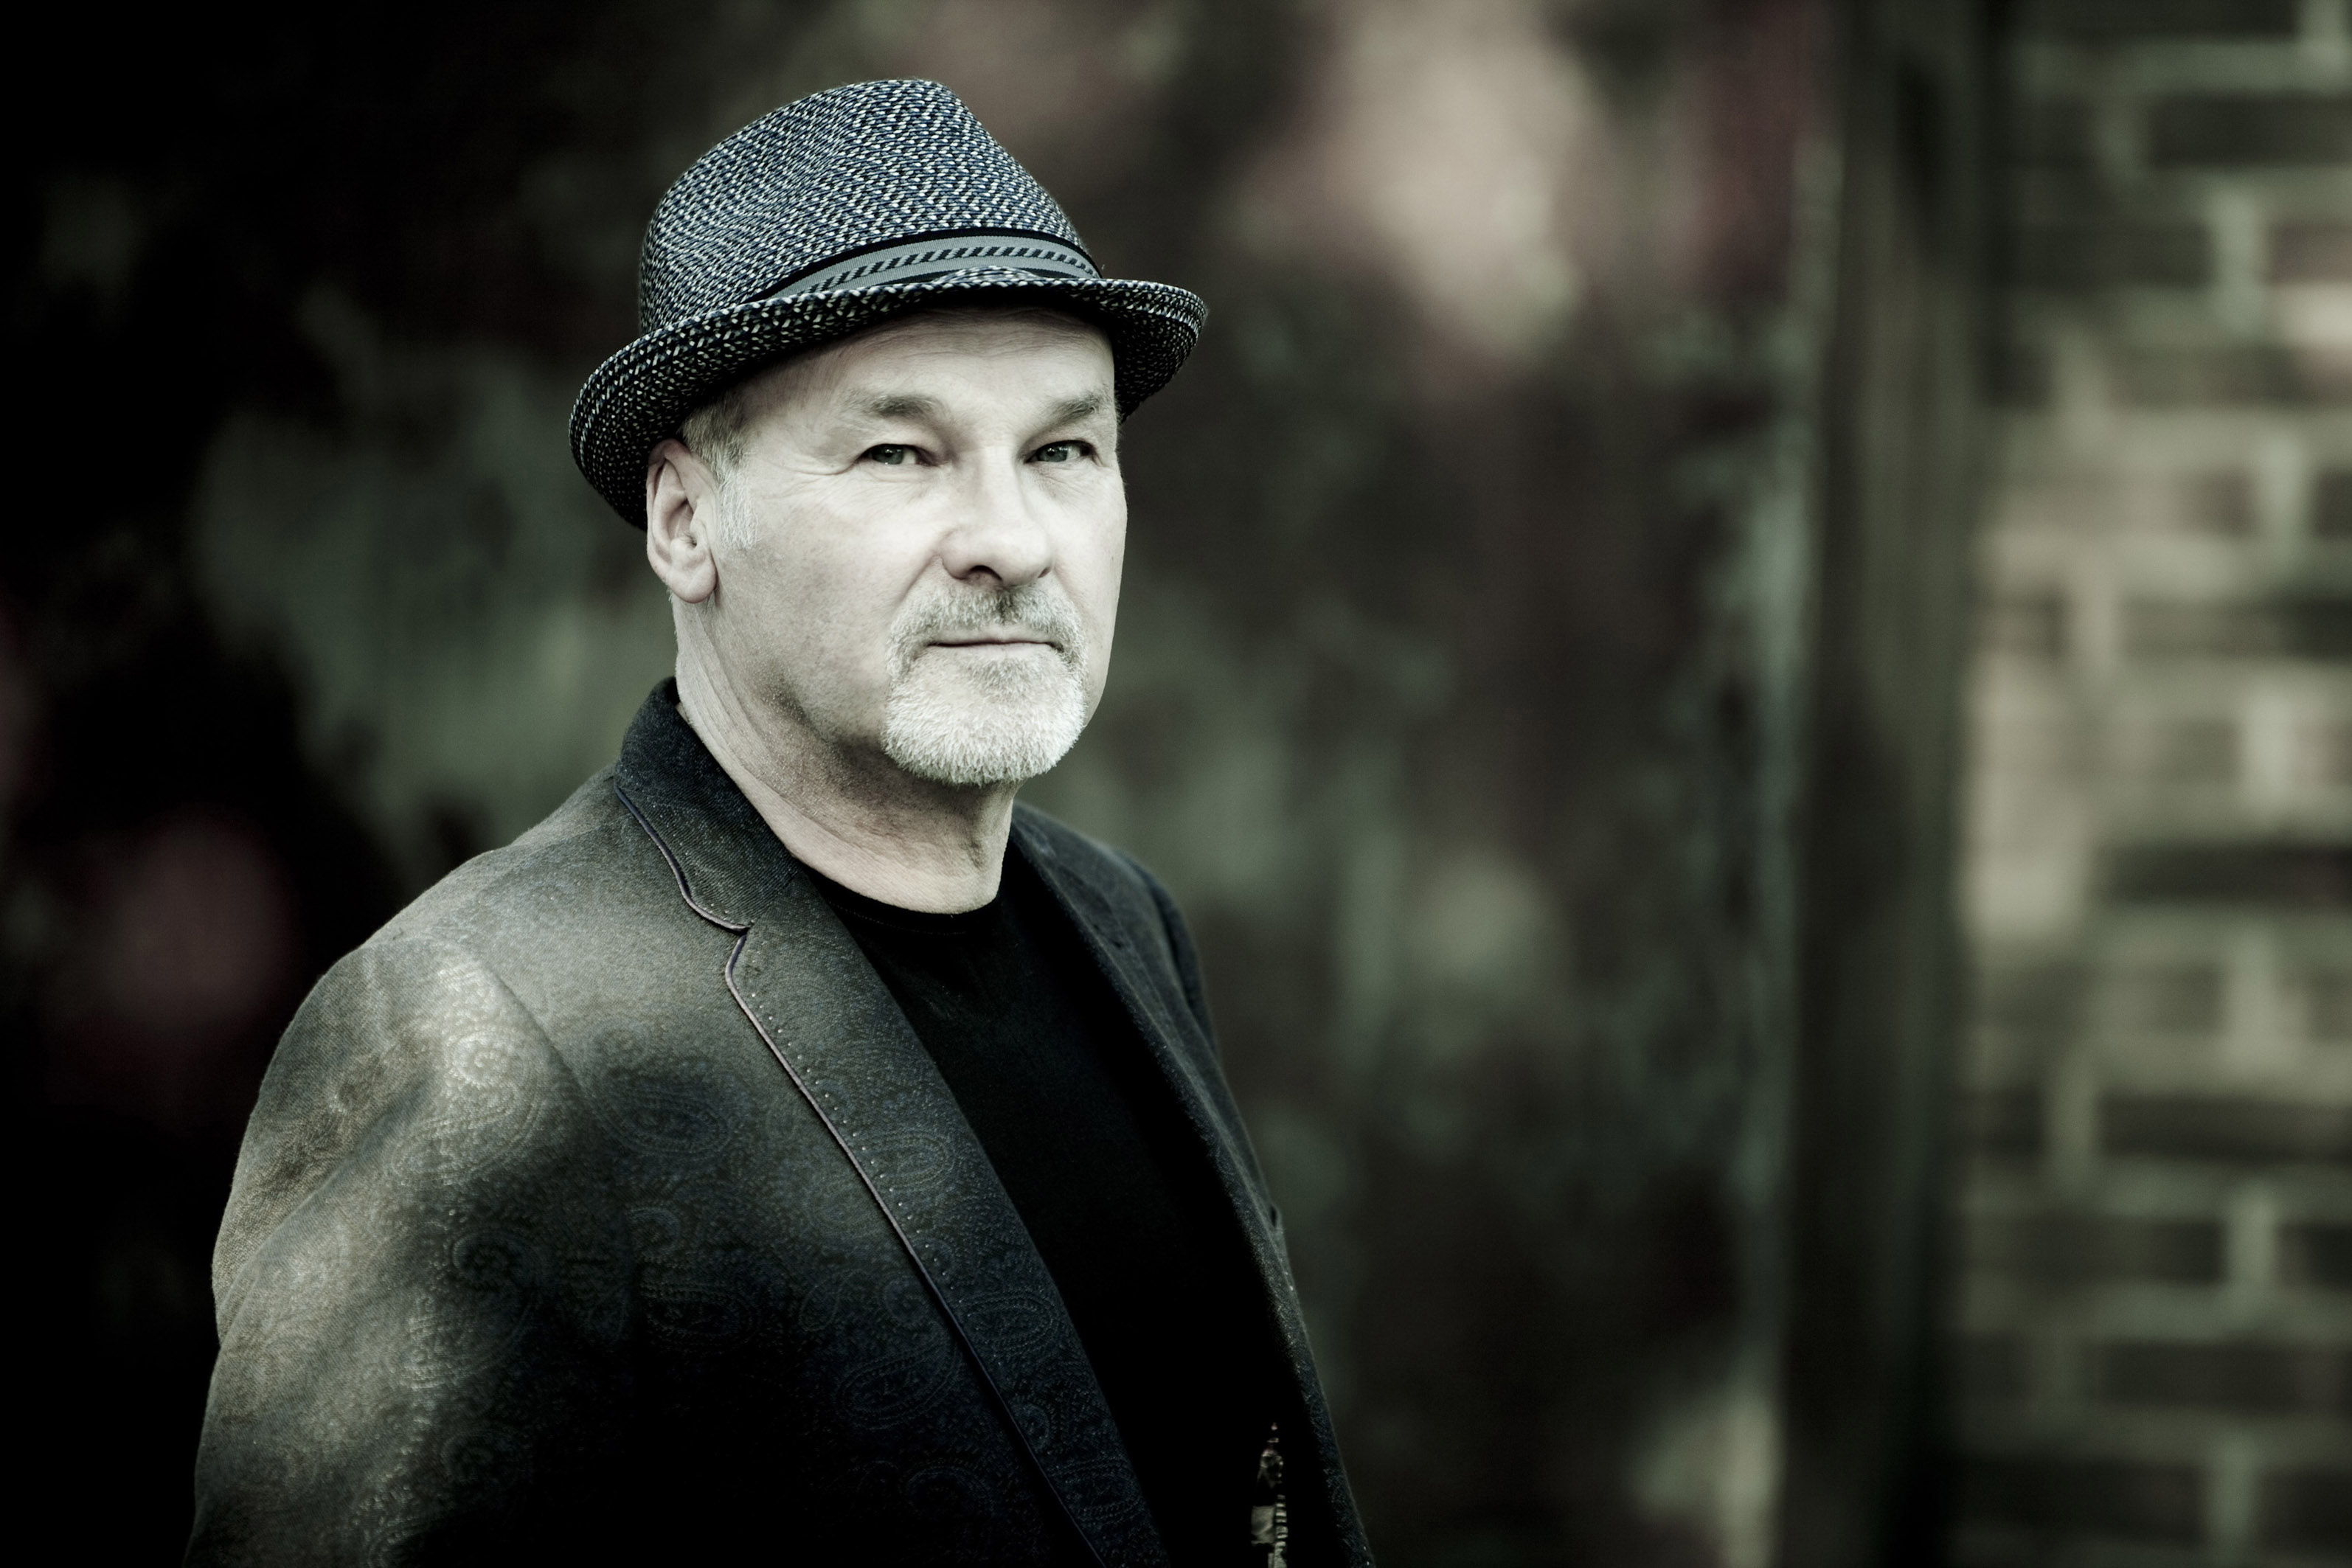 Paul Carrack Pics, Music Collection